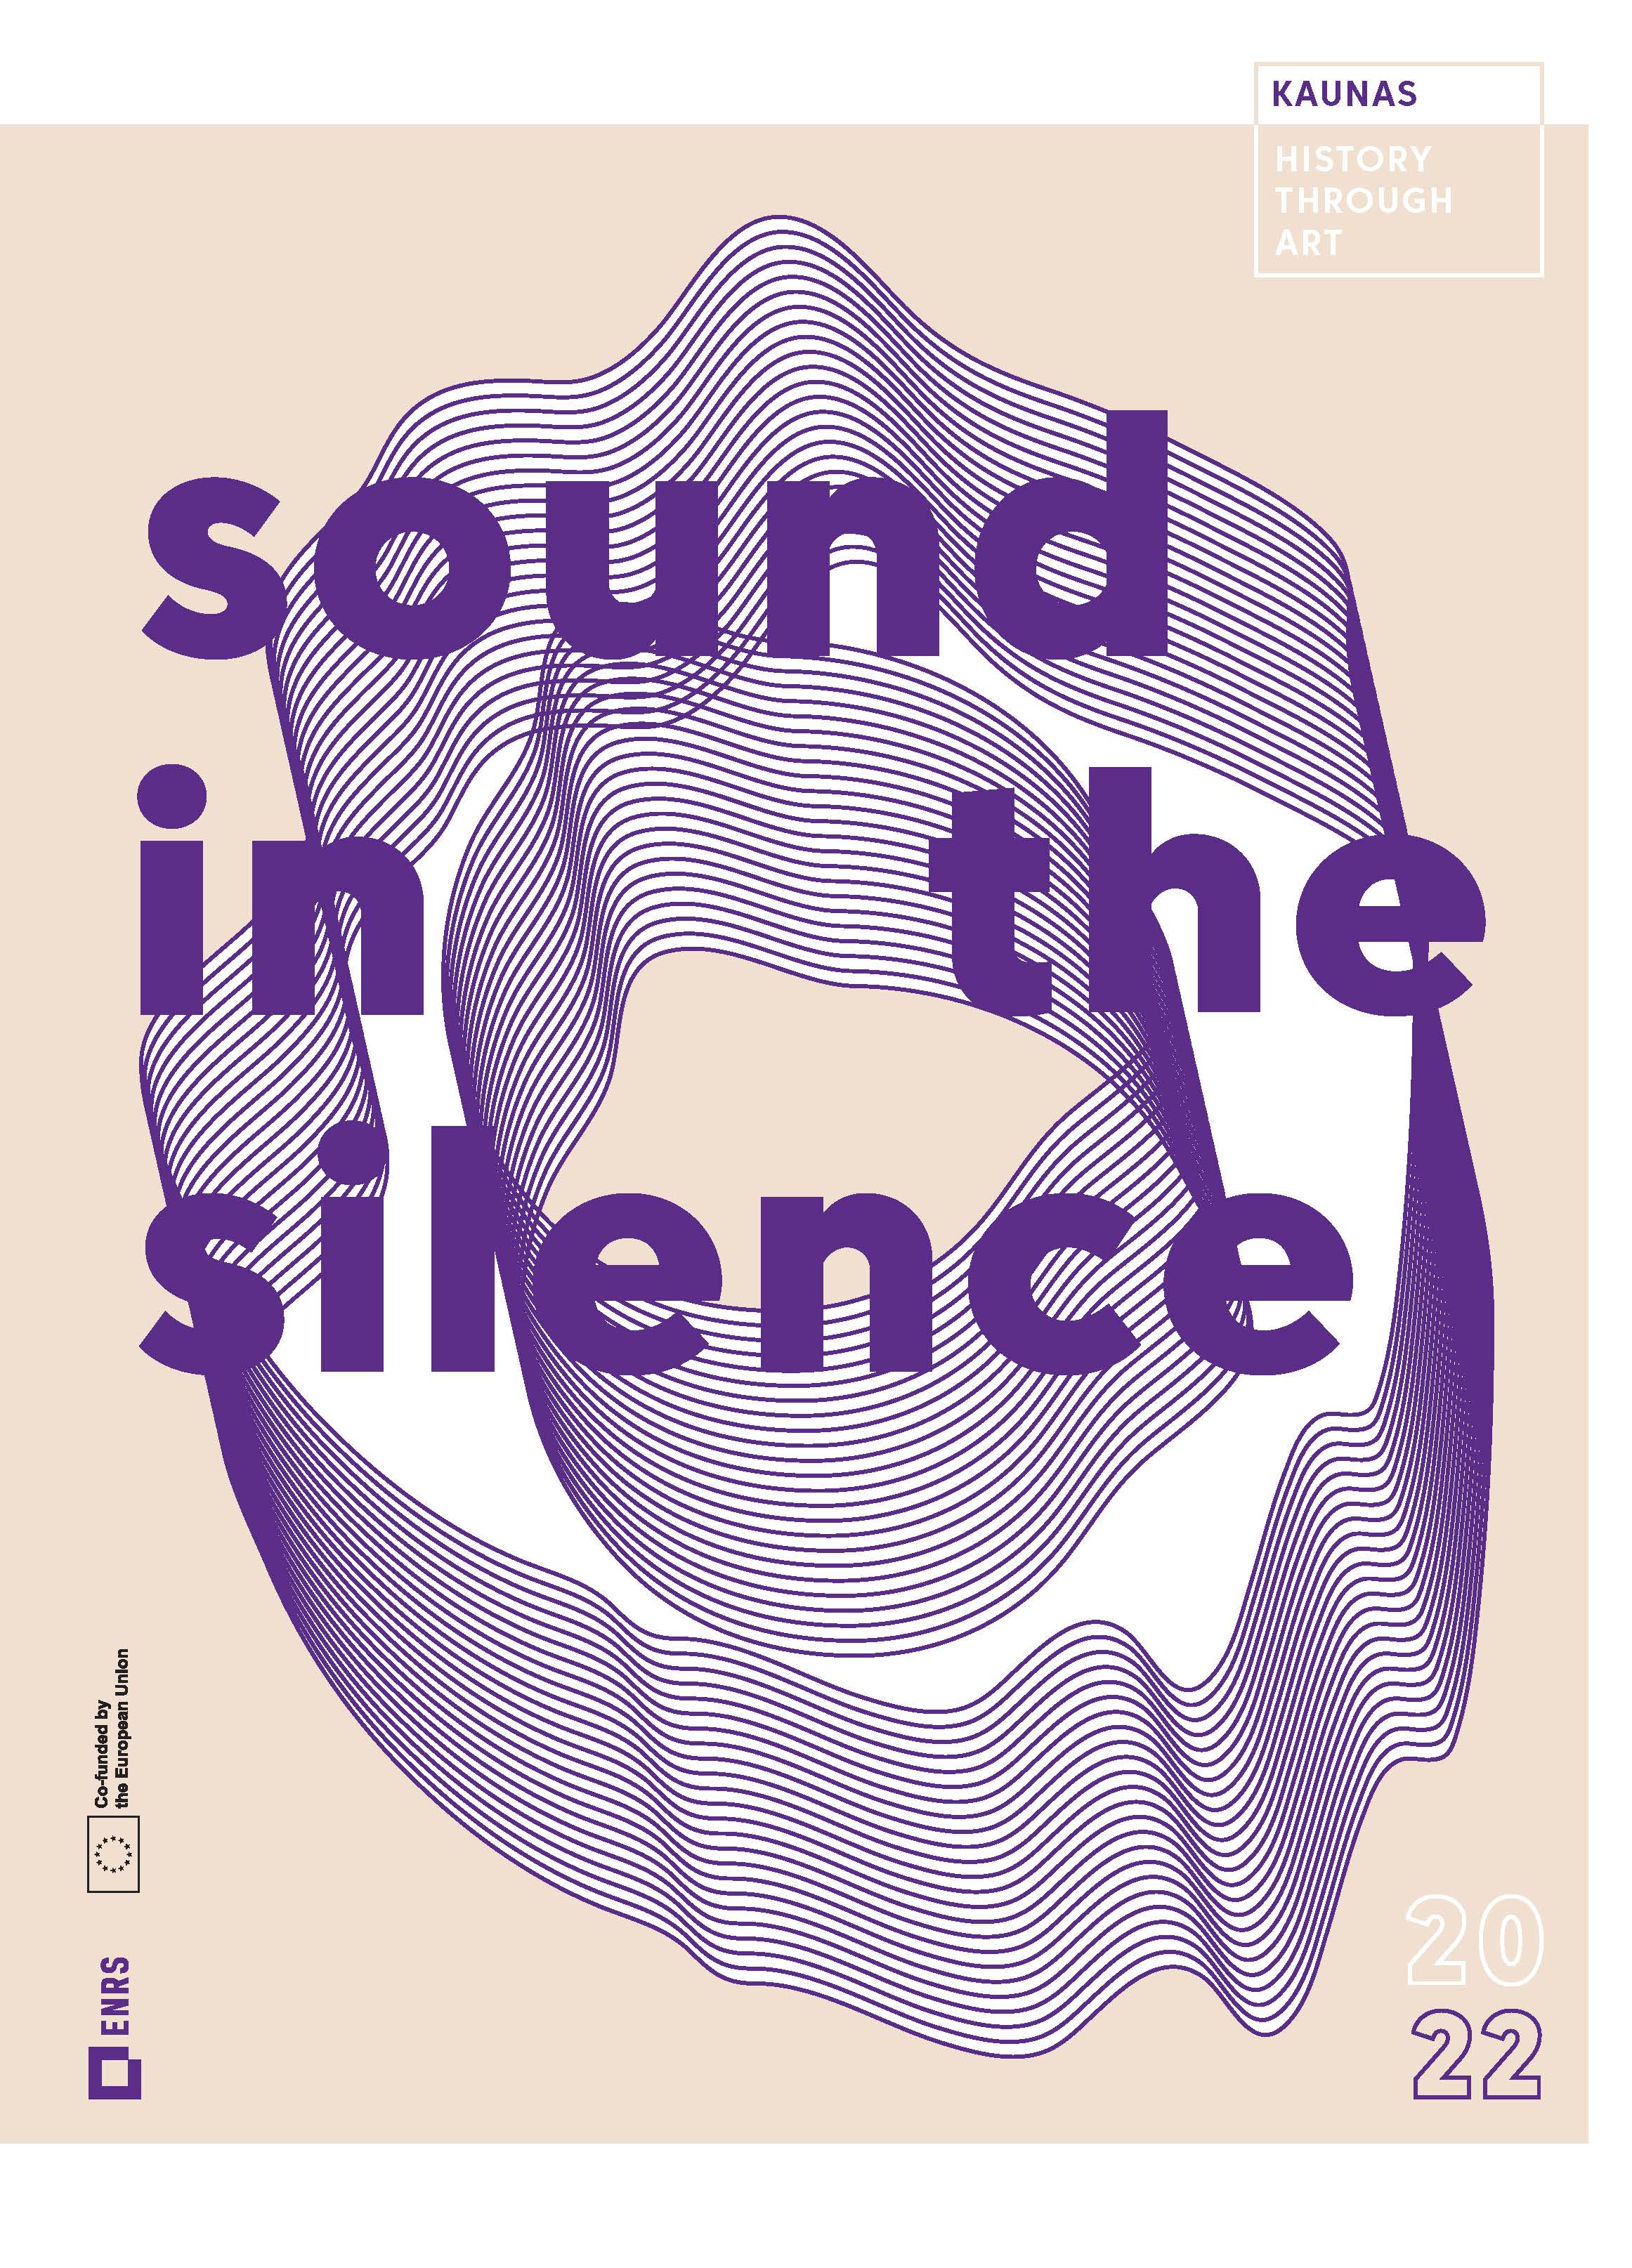 Photo of the publication Sound in the Silence Kaunas 2022